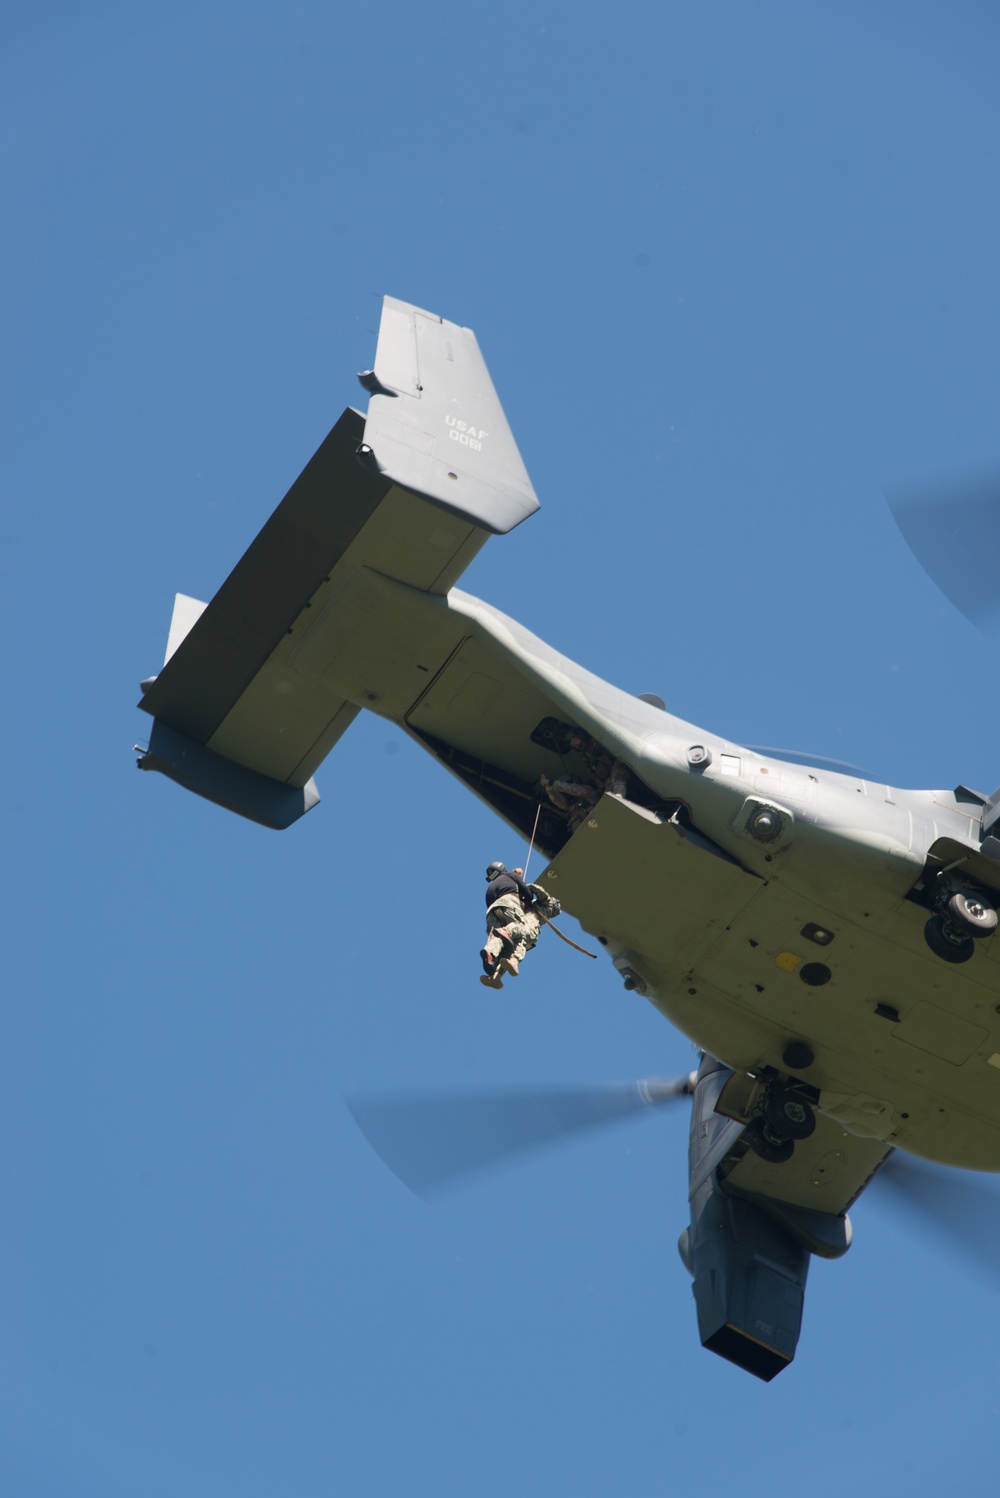 SOCEUR U.S. Sailors and Airman train insertion and extraction techniques utilizing an MV-22 Osprey